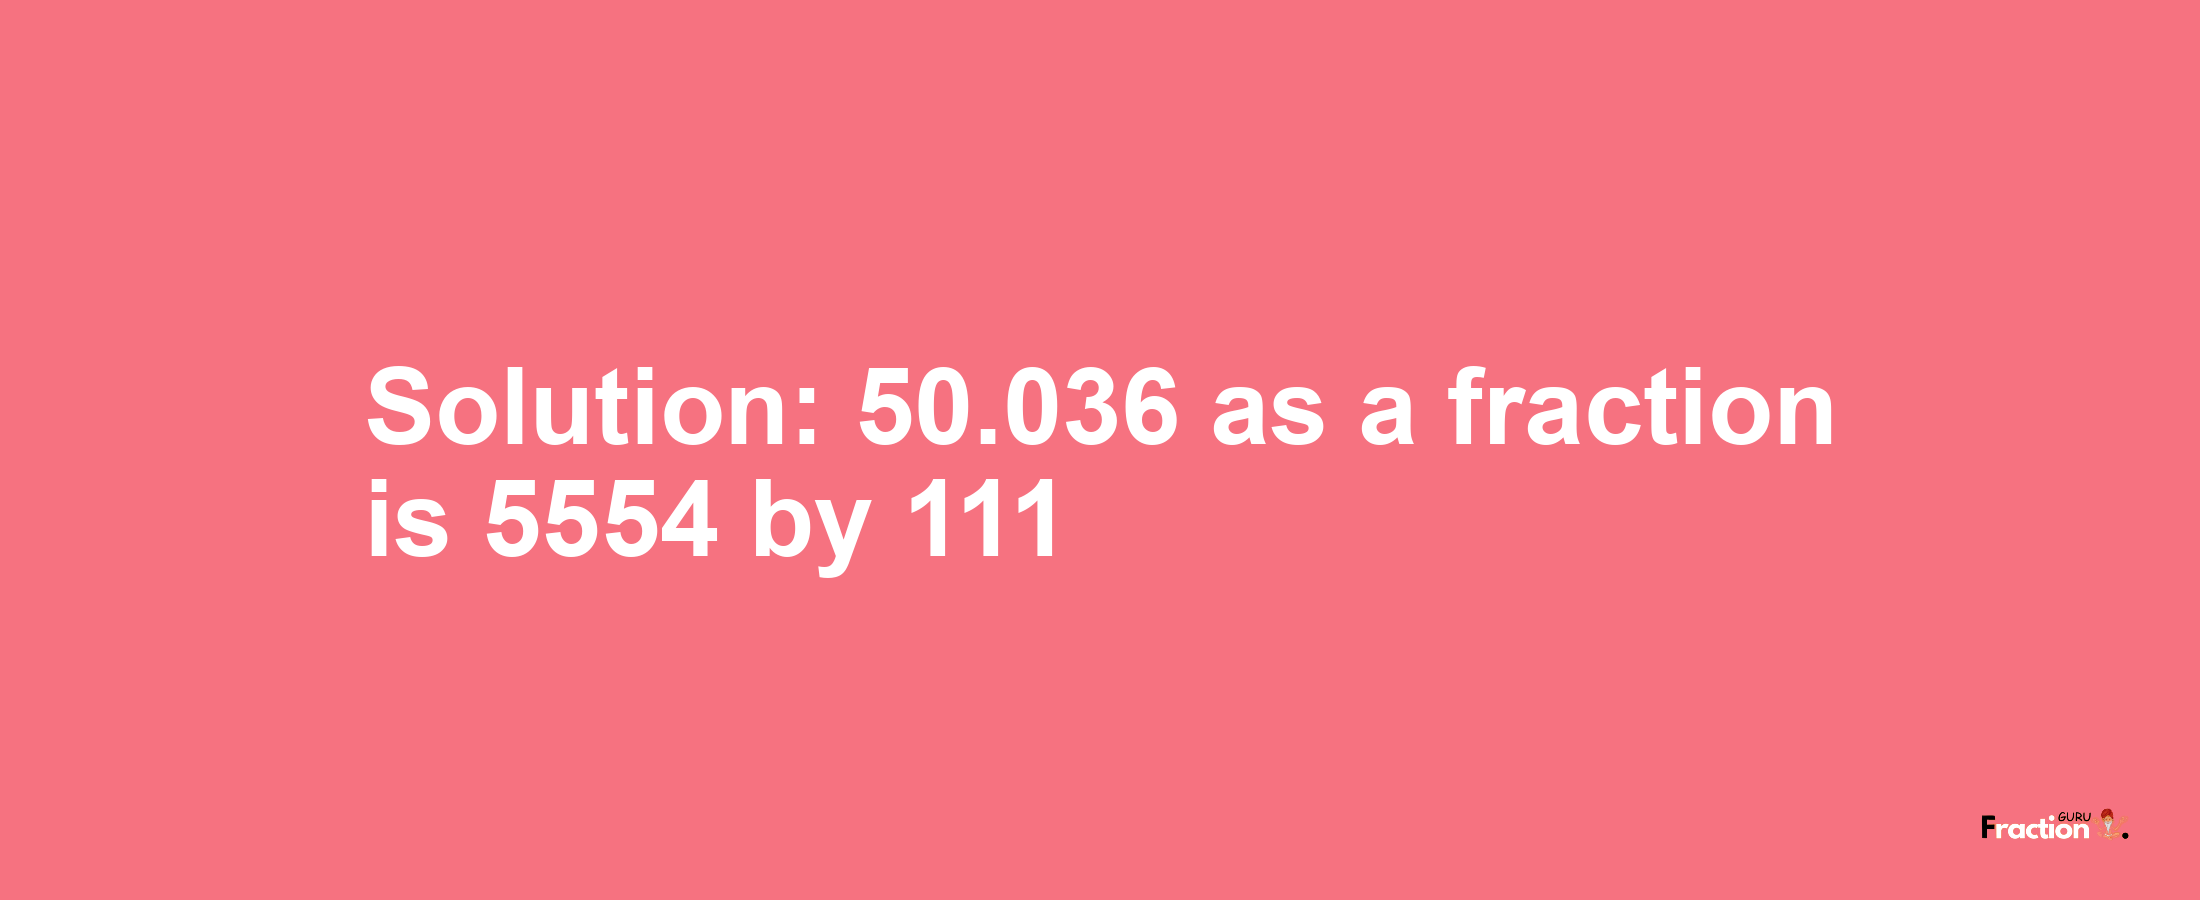 Solution:50.036 as a fraction is 5554/111